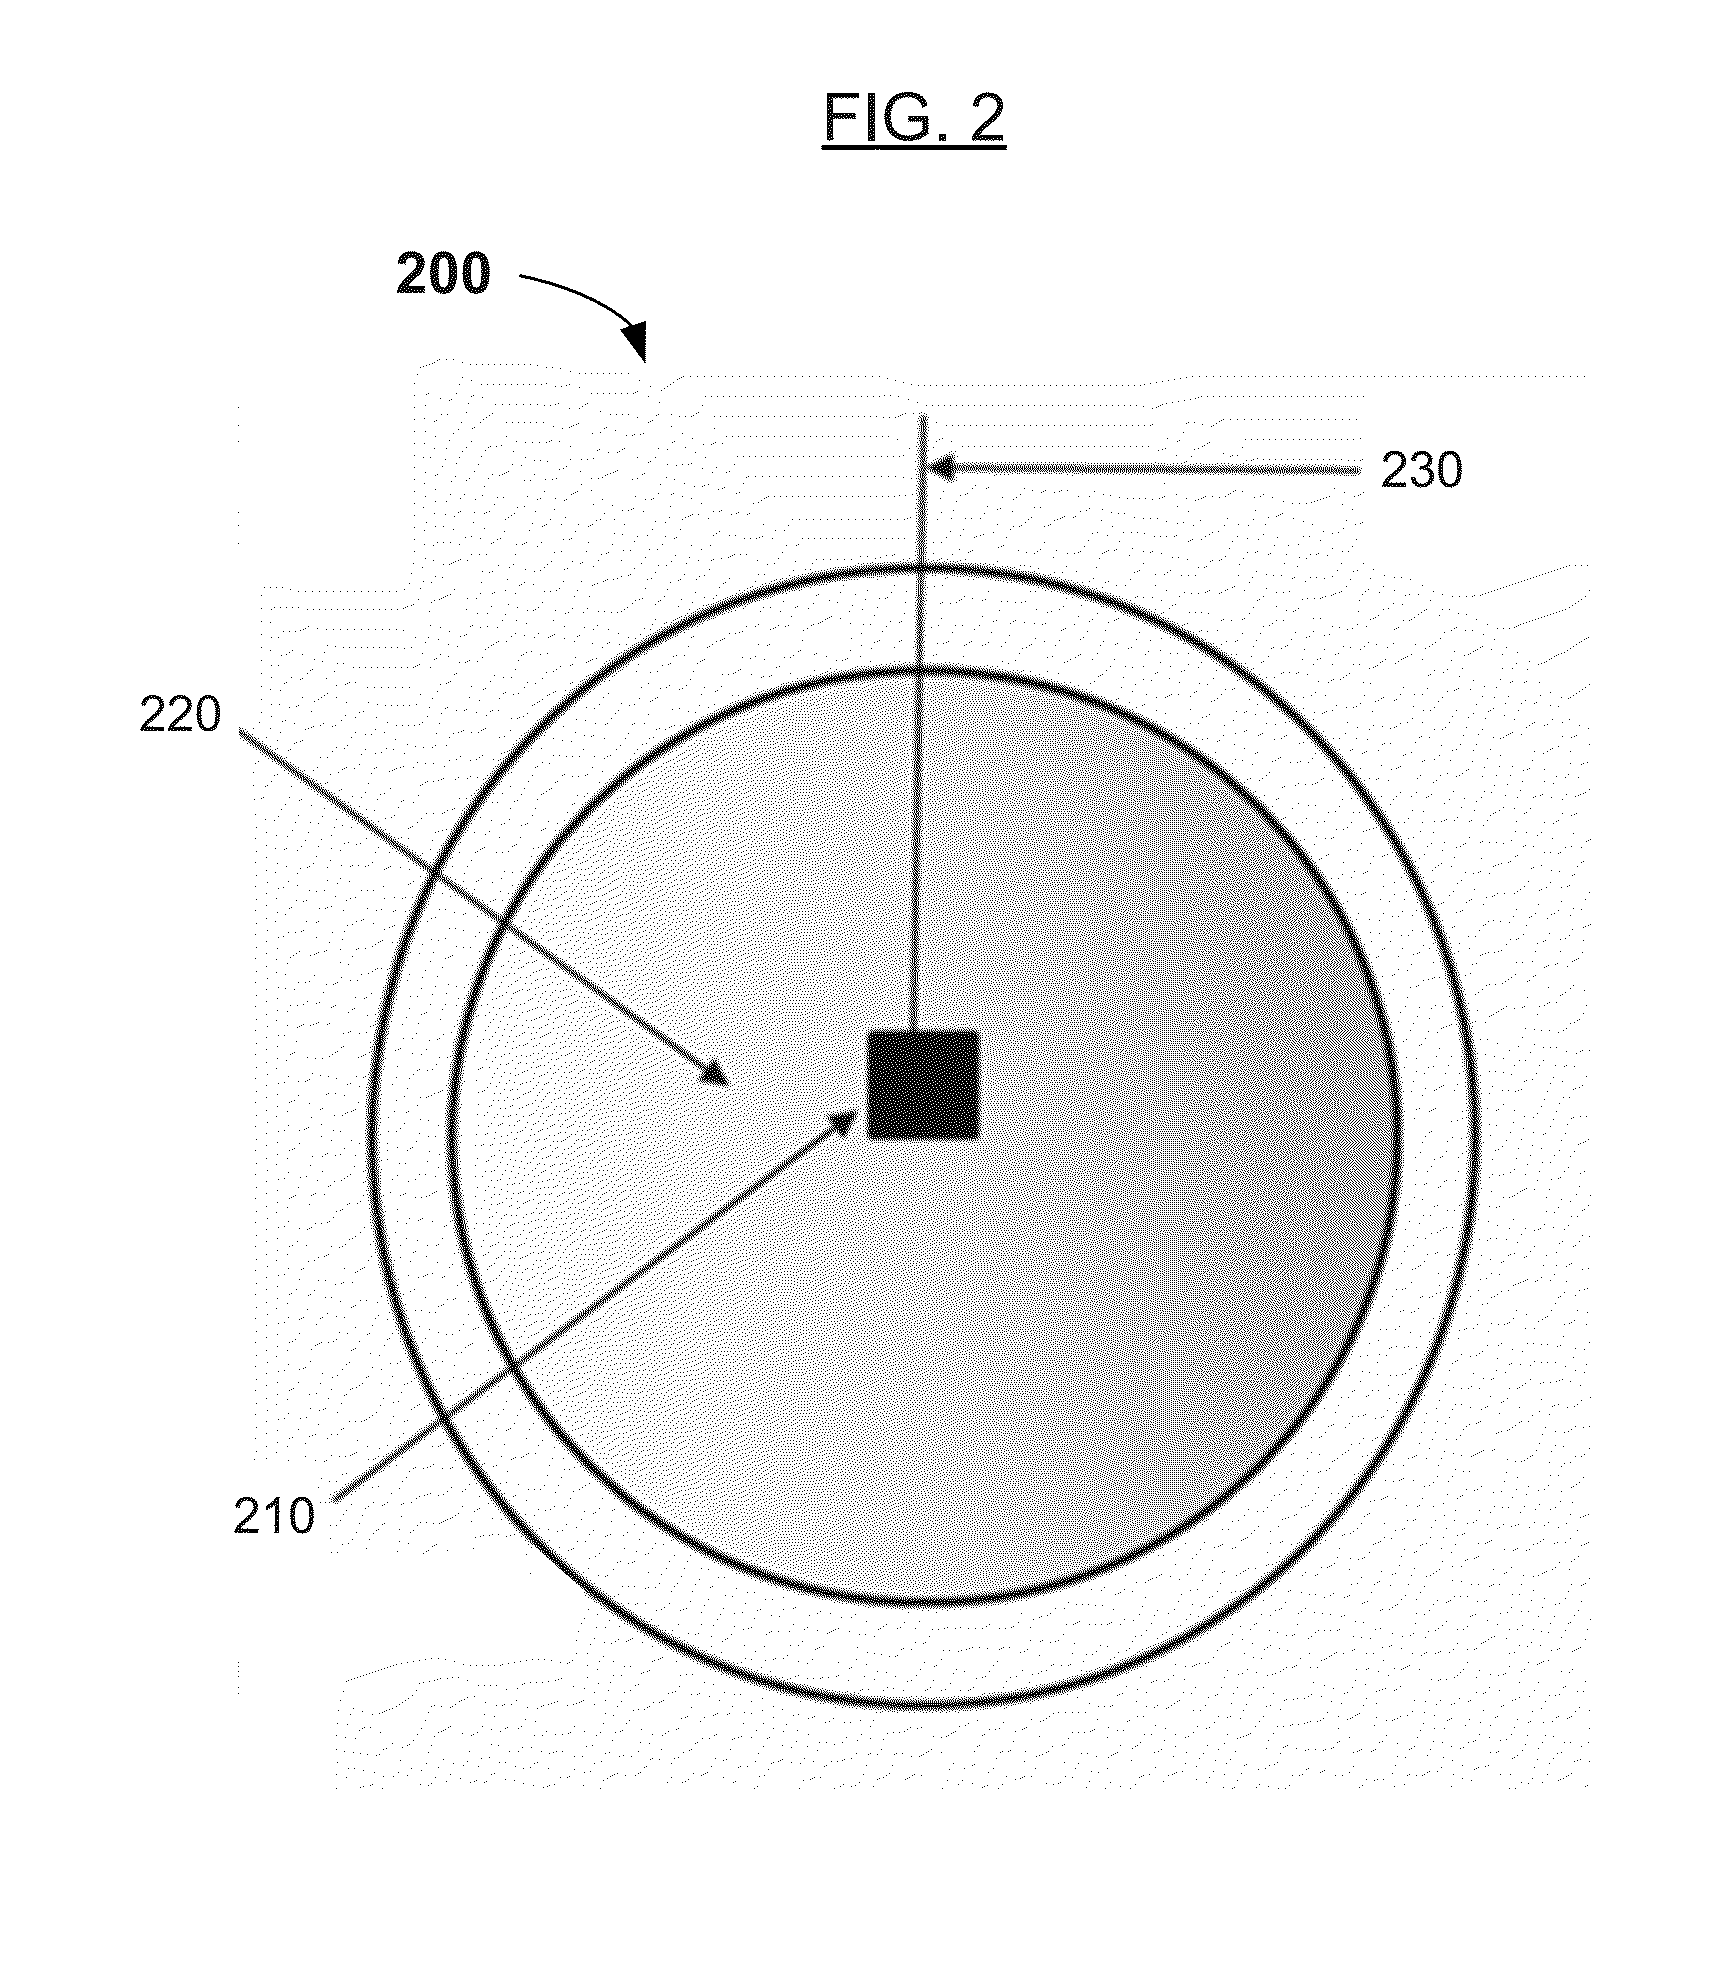 Single Chamber Volume Measurement Apparatus and Methods of Making and Using the Same